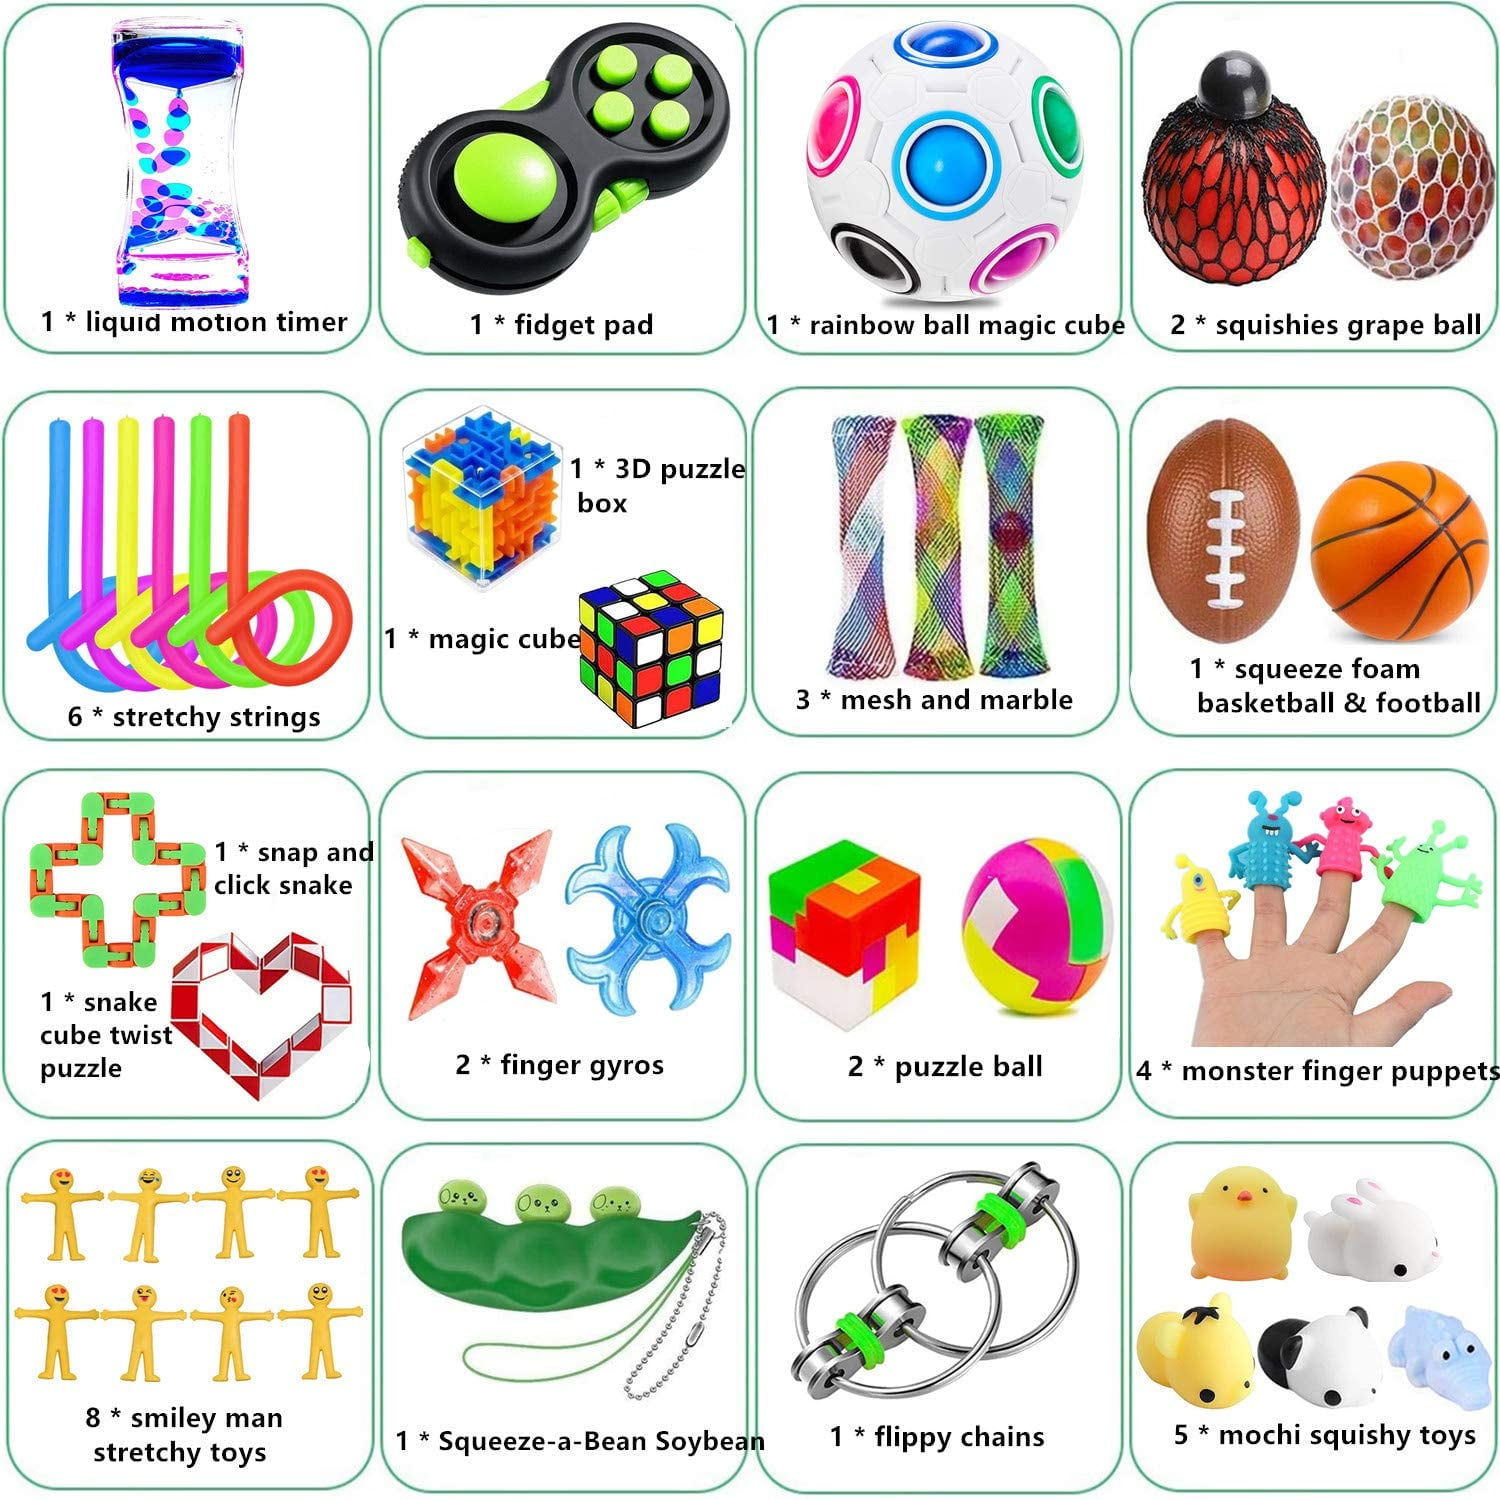 Fidget Toy Packs lecover 31pcs Sensory Toys Set Stress Relief and Anti-Anxiety Tools Bundle for Kids Adult Figetget Toy,Marble Mesh,Stress Ball,Bubble Fidget Pack Party Favors Gifts Classroom Reward 